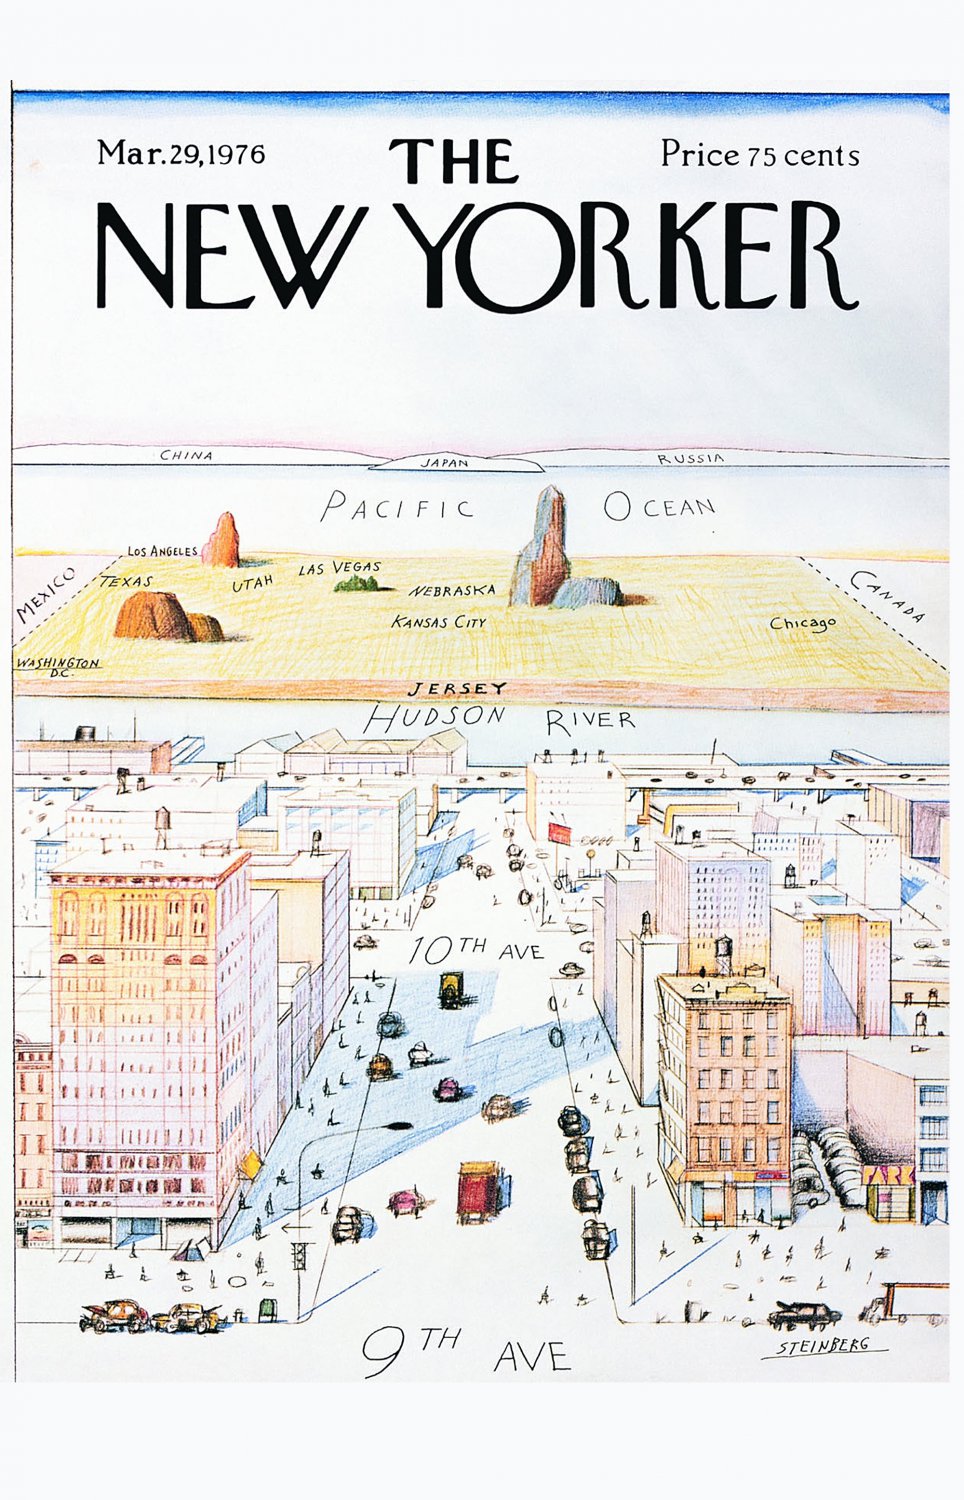 The New Yorker 1976  13"x19" (32cm/49cm) Polyester Fabric Poster